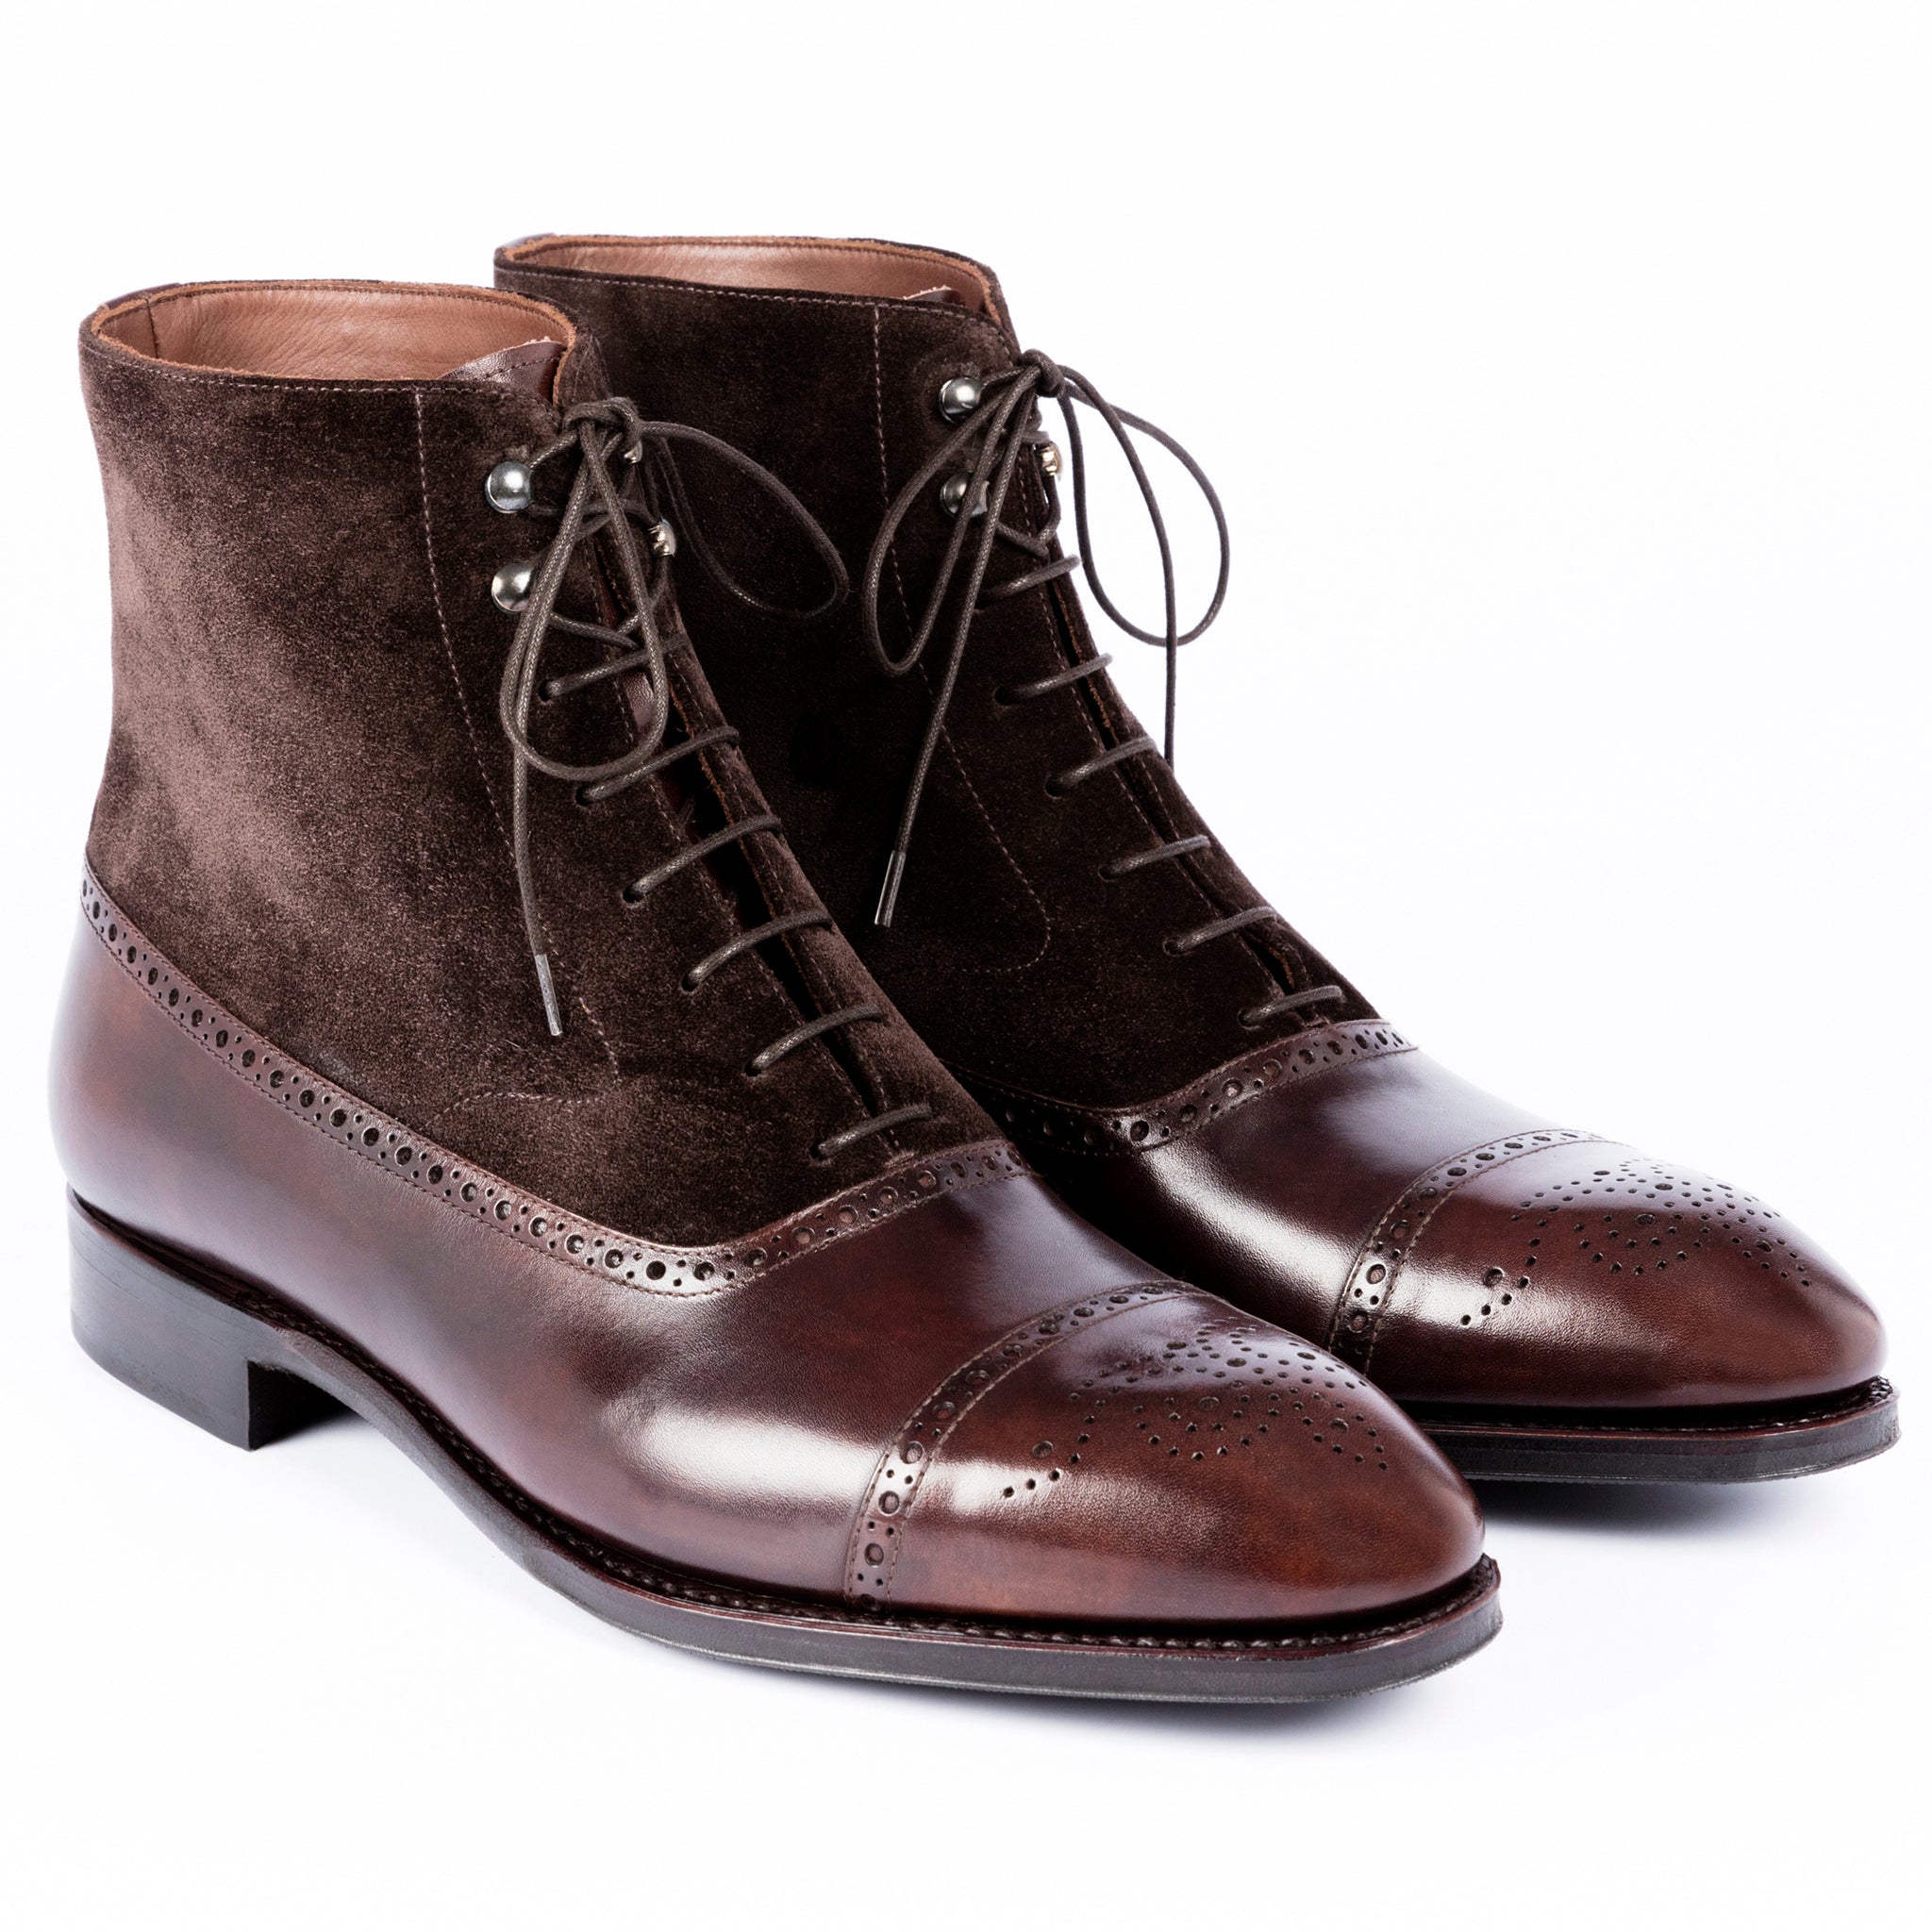 TLB Mallorca | Men's Boots made of leather | Men's Shoes | model Alan ...